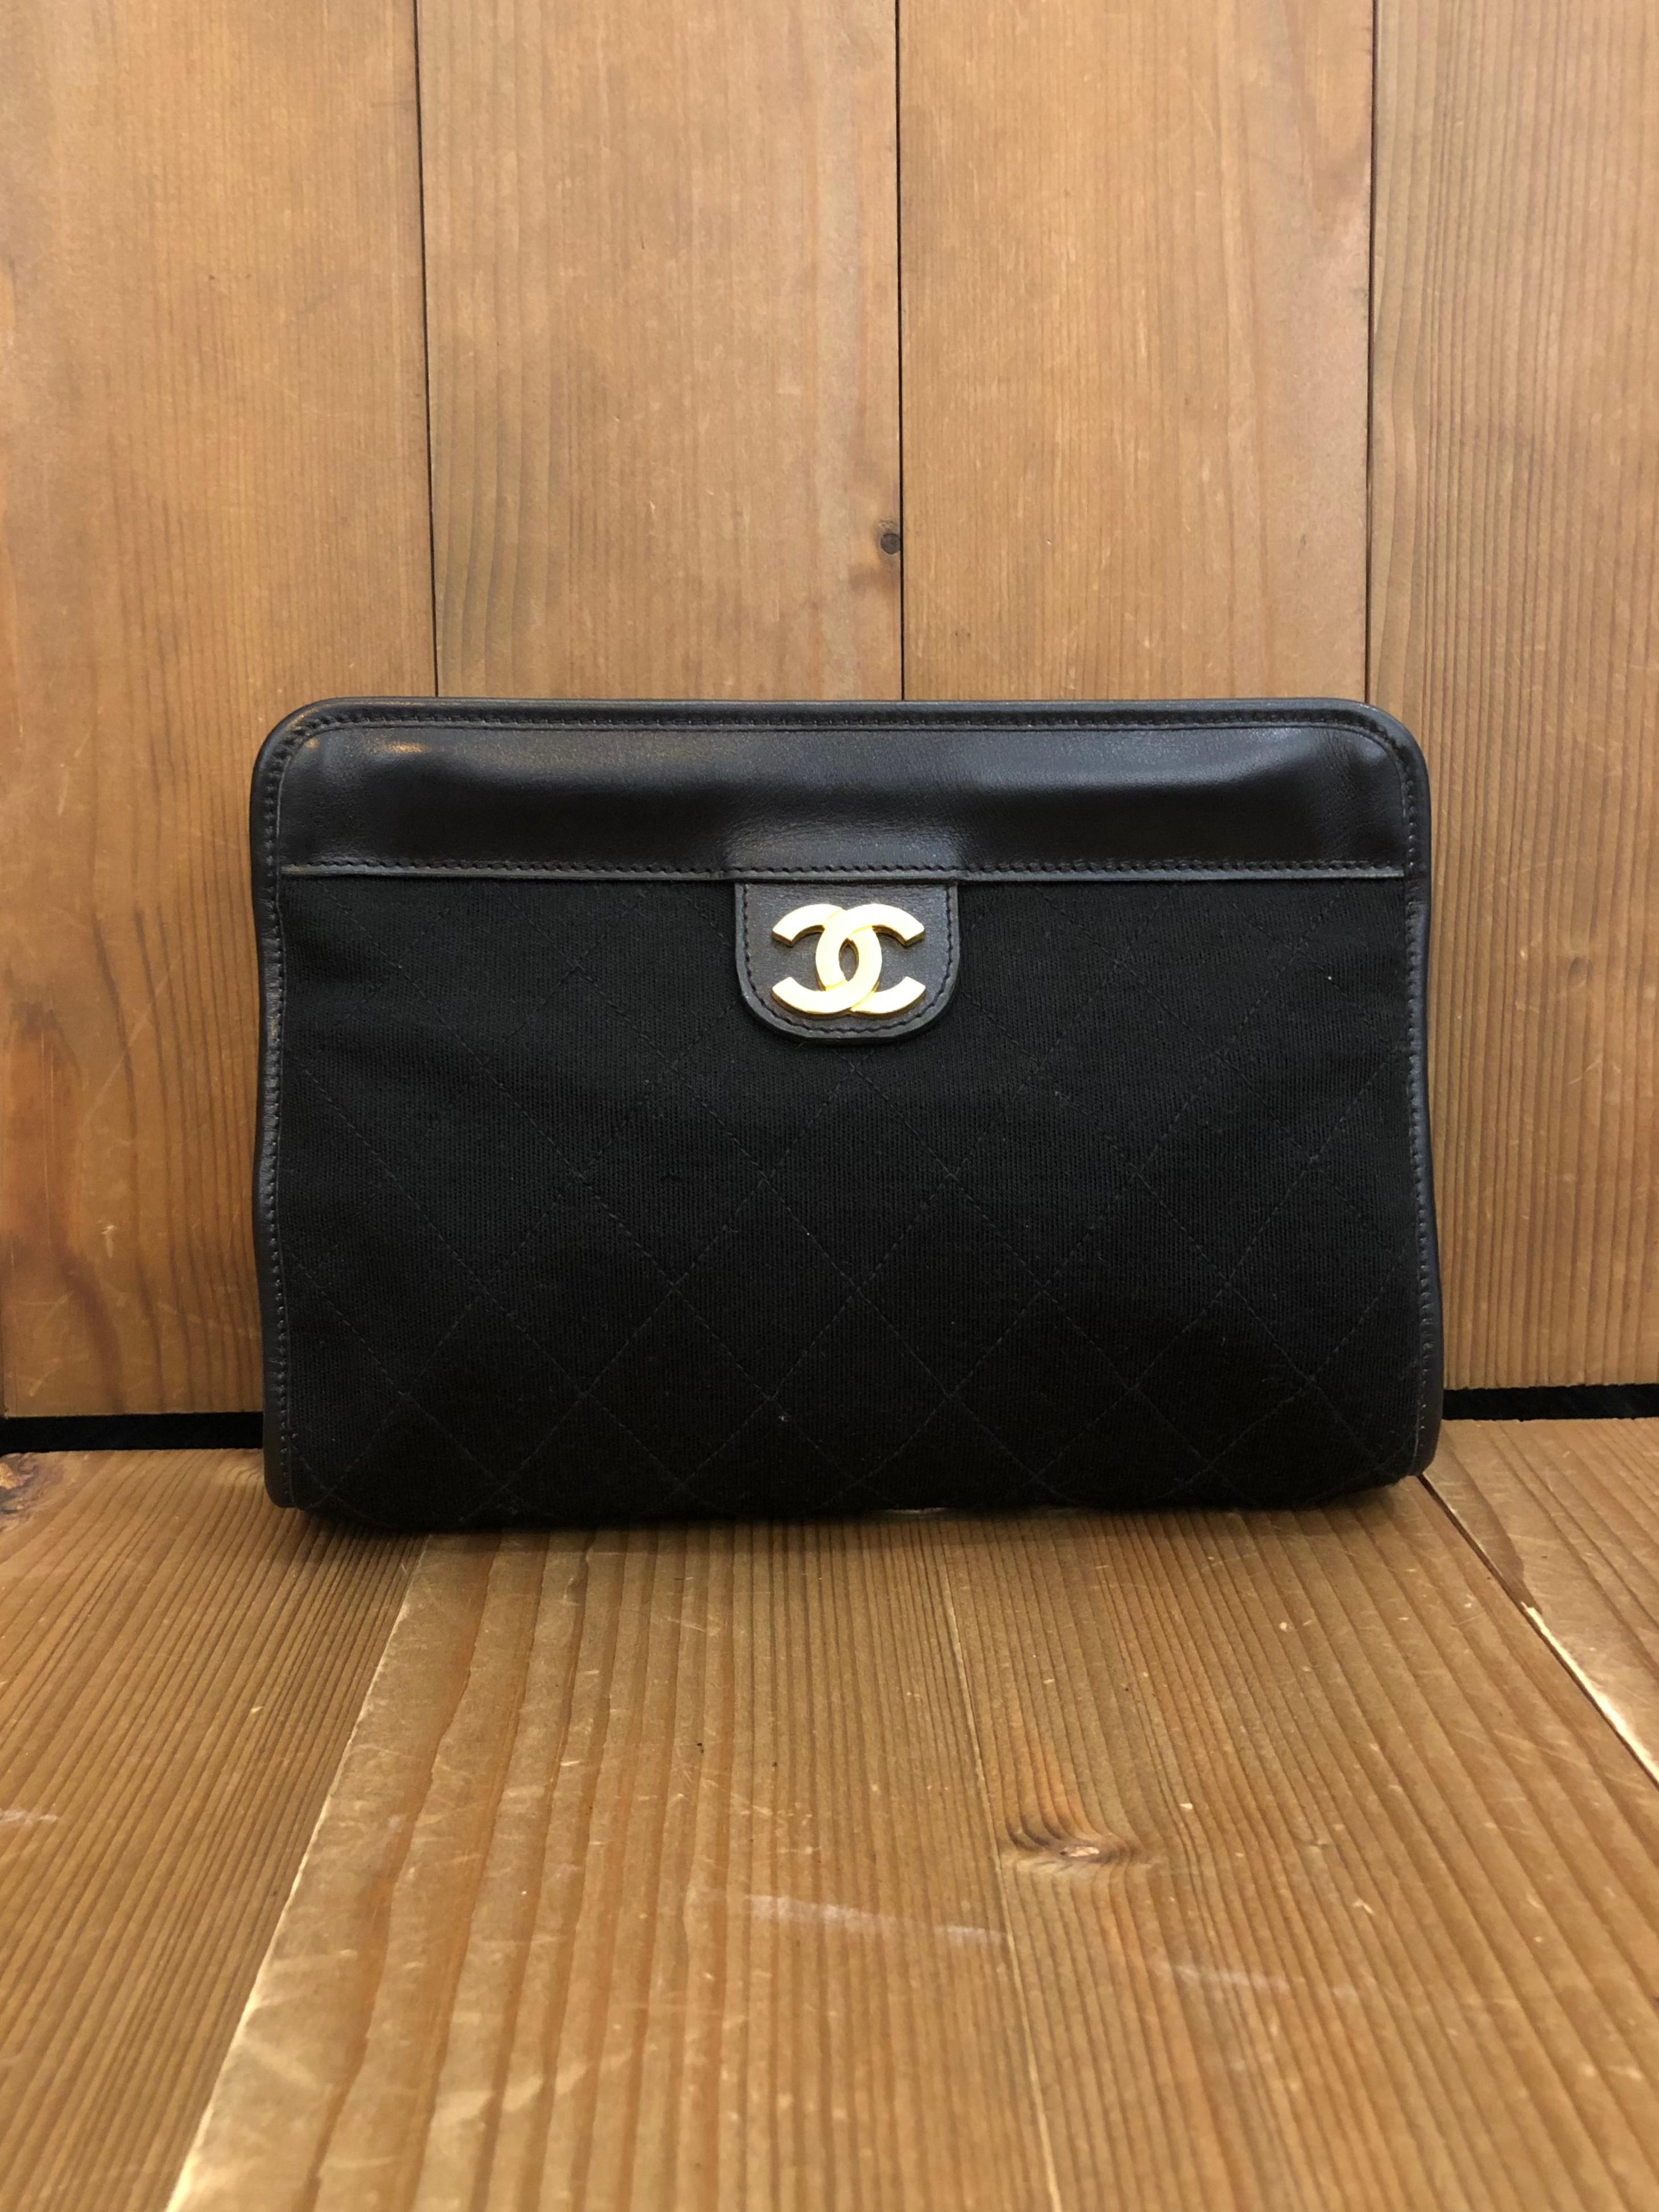 This 1980s vintage CHANEL clutch bag is crafted of diamond quilted jersey in black and gold toned hardware. Top spring closure opens to a lambskin leather interior in burgundy. Made in France. Measures approximately 8.25 x 5.5 x 2 inches. This